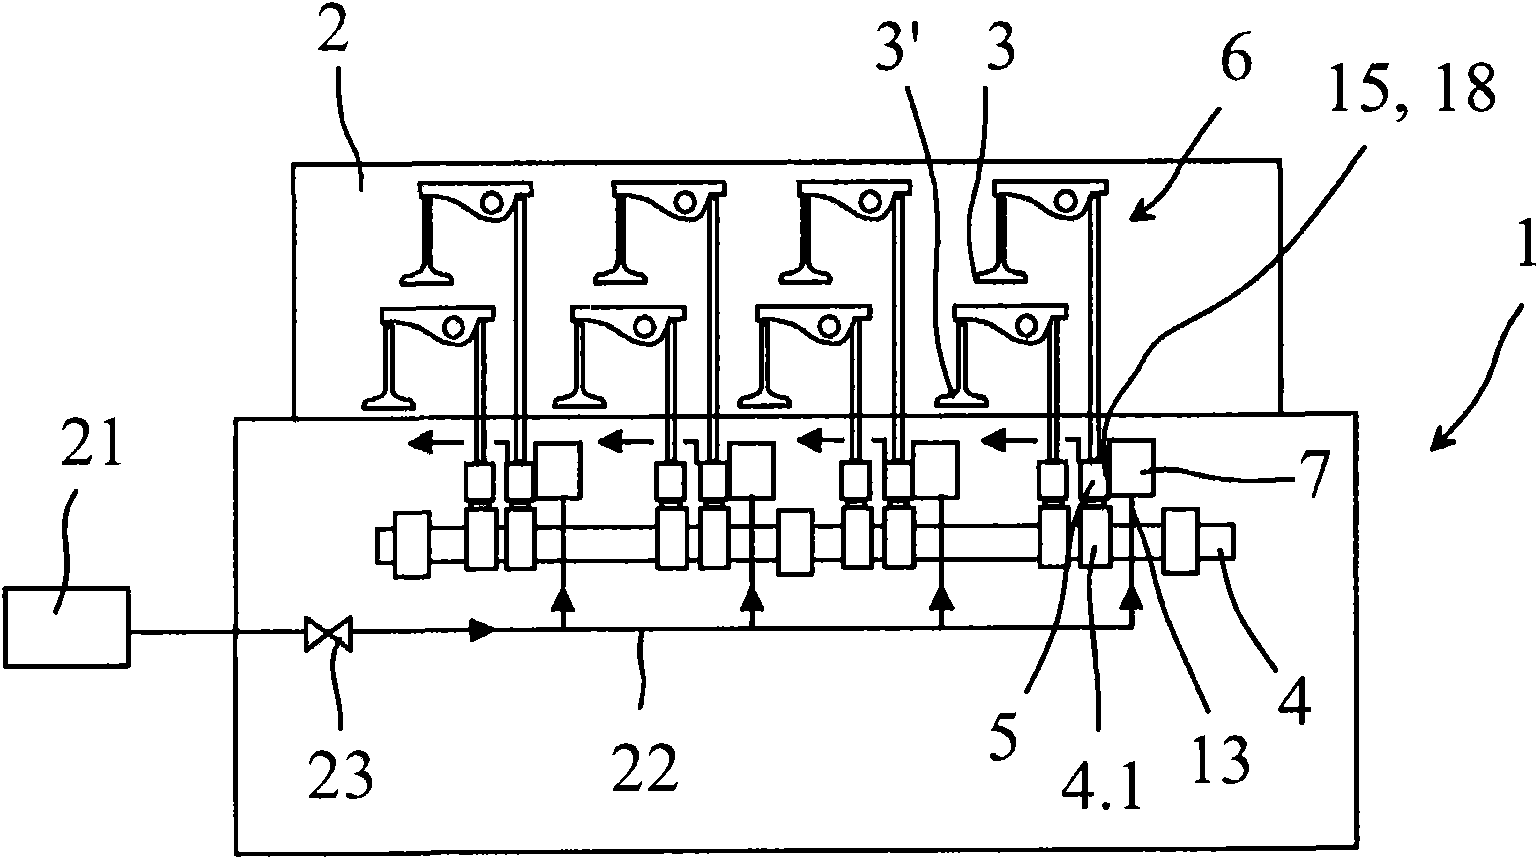 Attenuator for damping pressure fluctuations in a hydraulic system